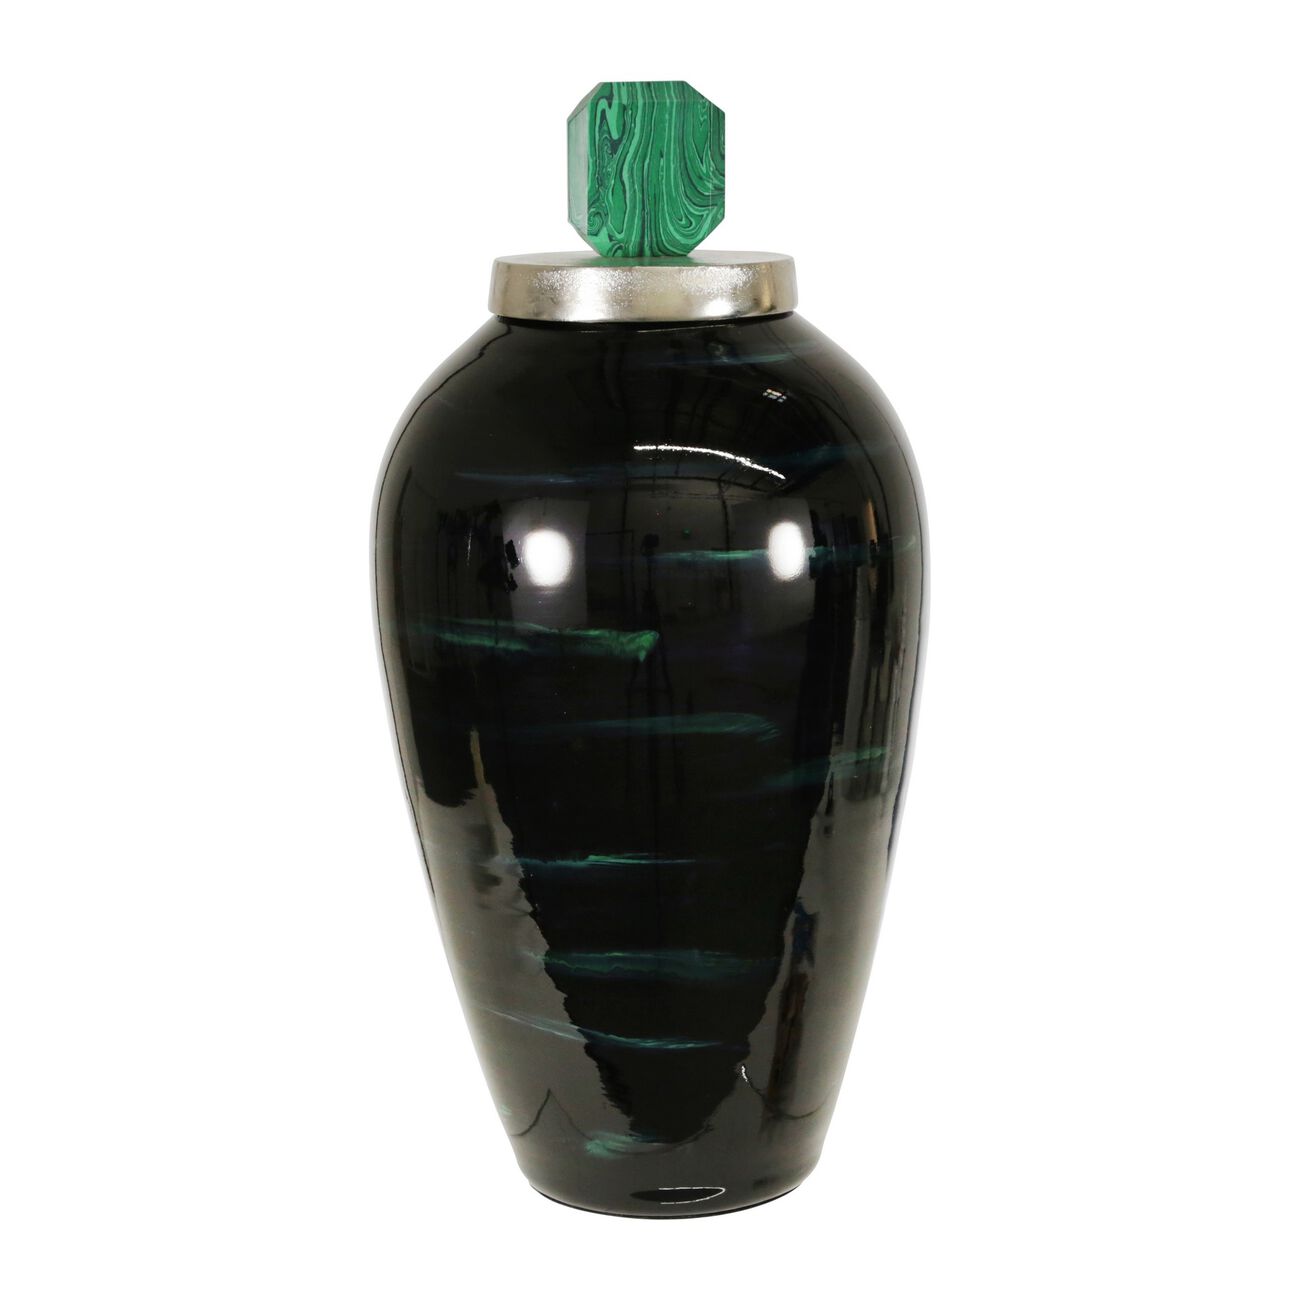 Contemporary Metal Elongated Urn Shaped Jar with Lid, Black and Green